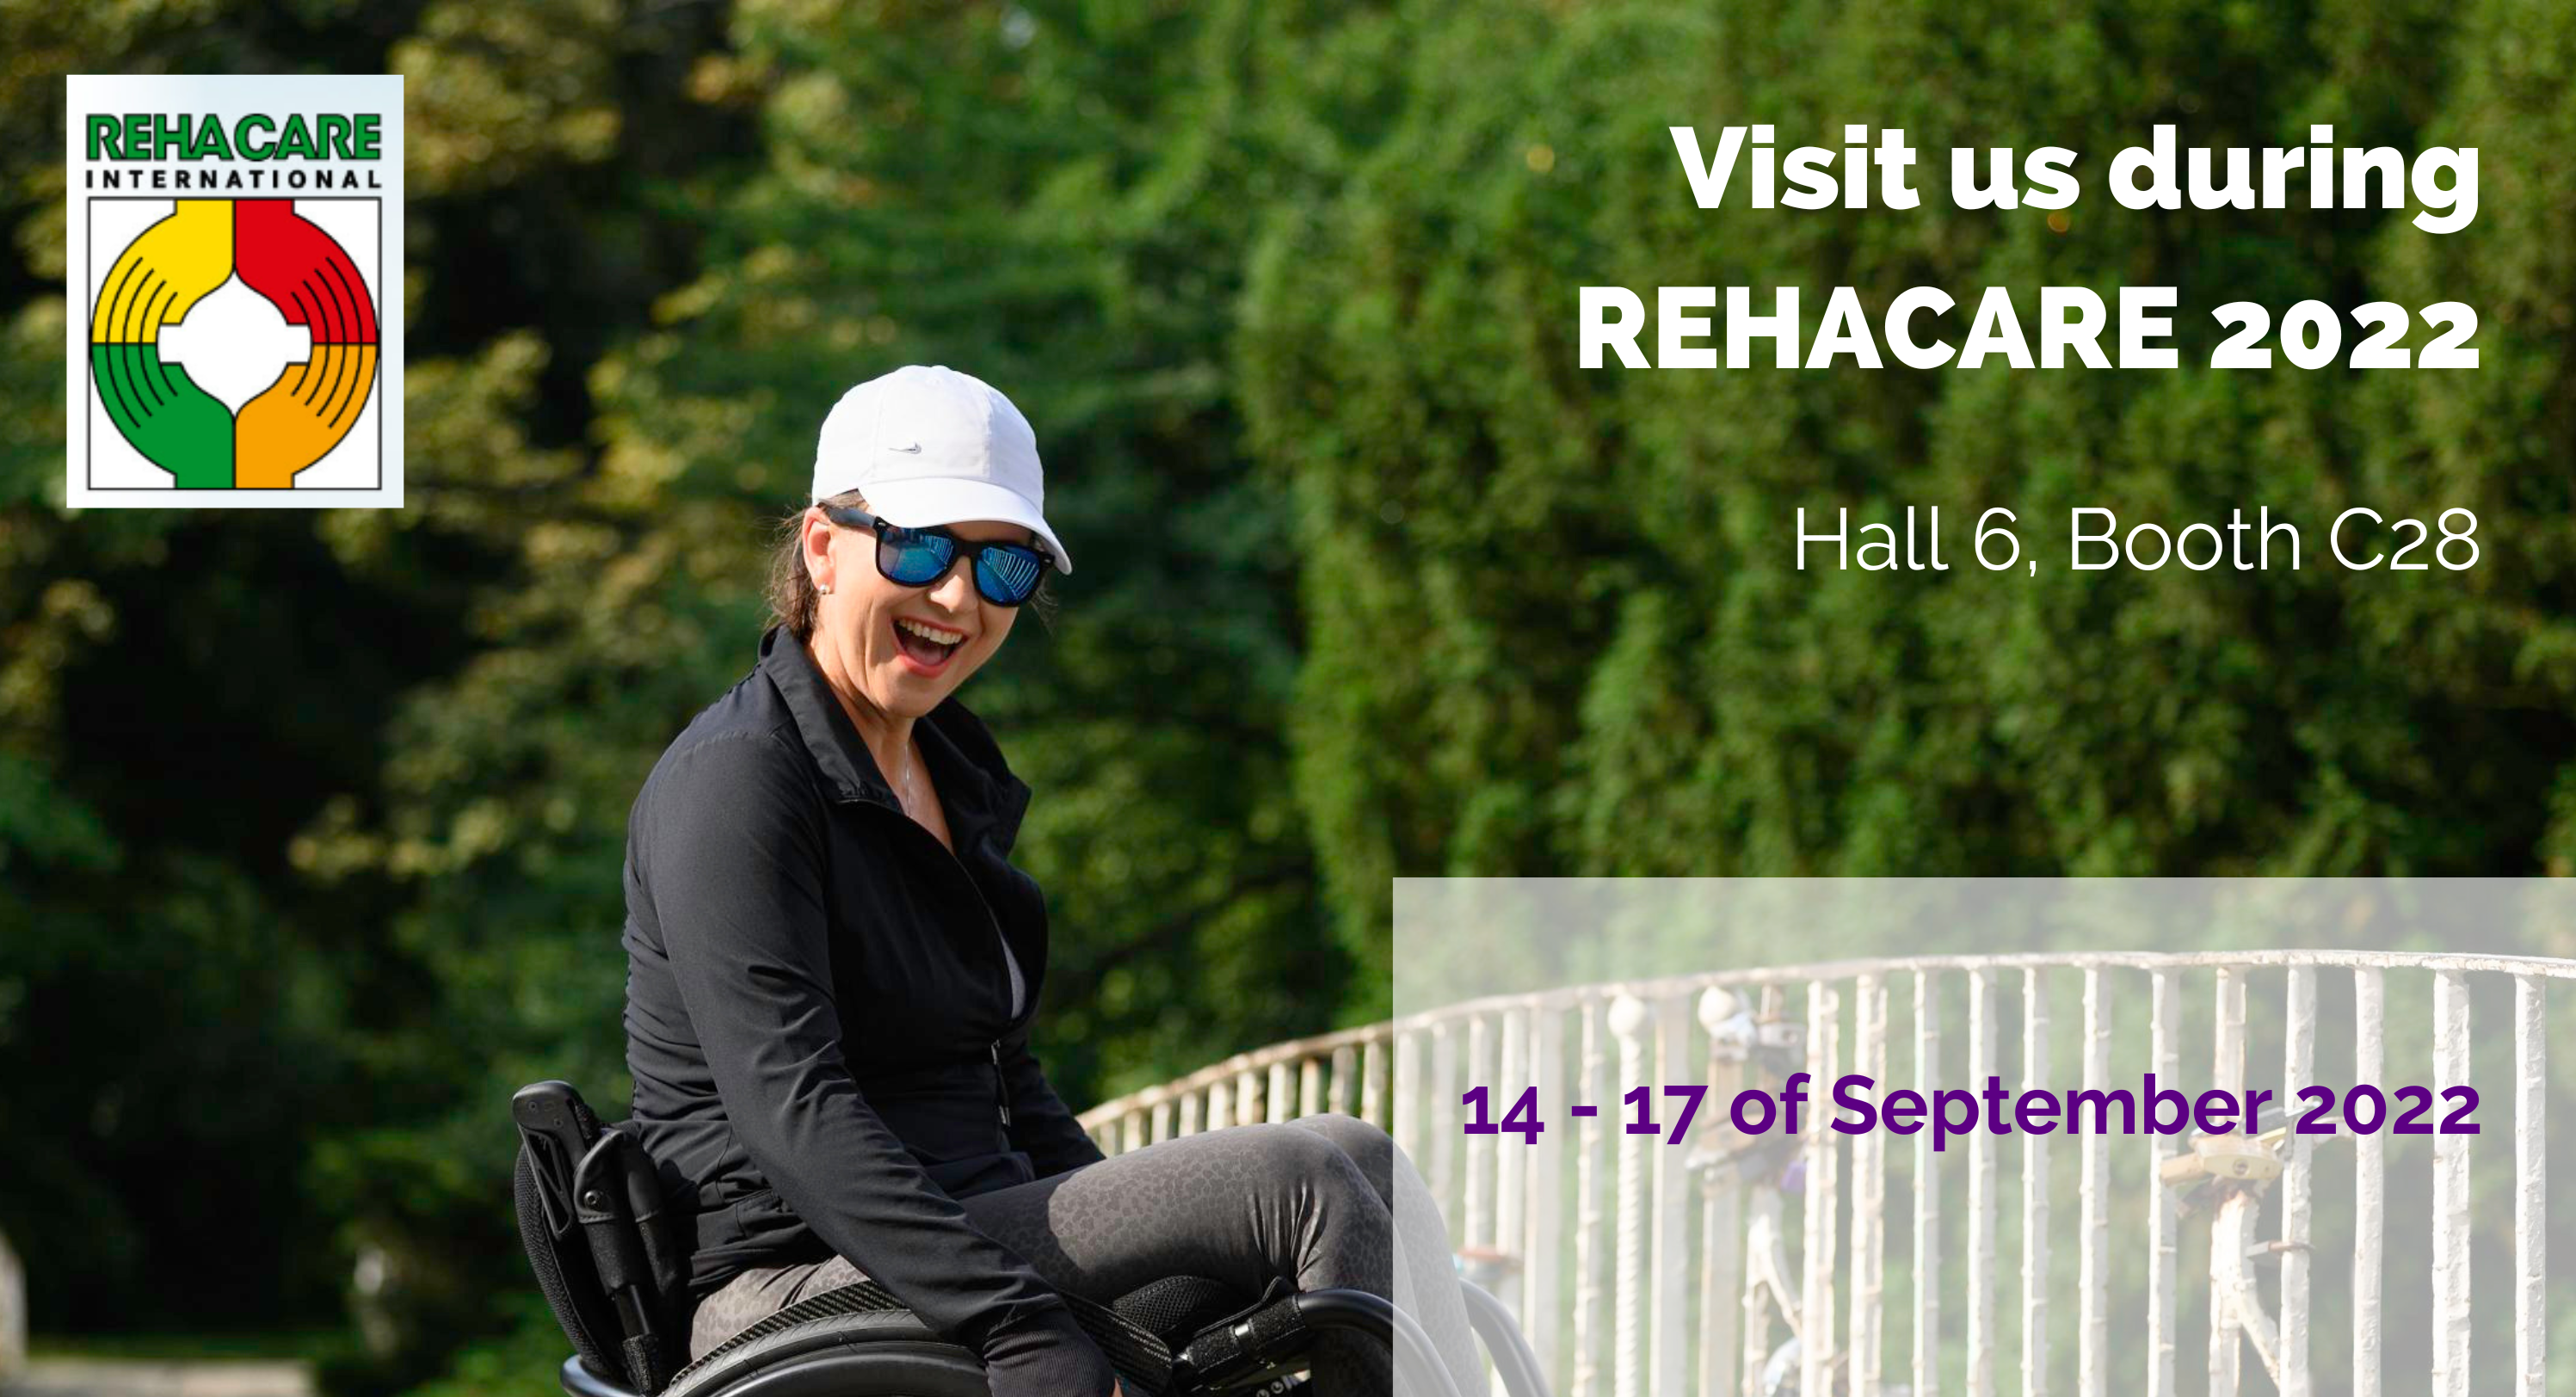 Invitation to MBL's booth during Rehacare 2022